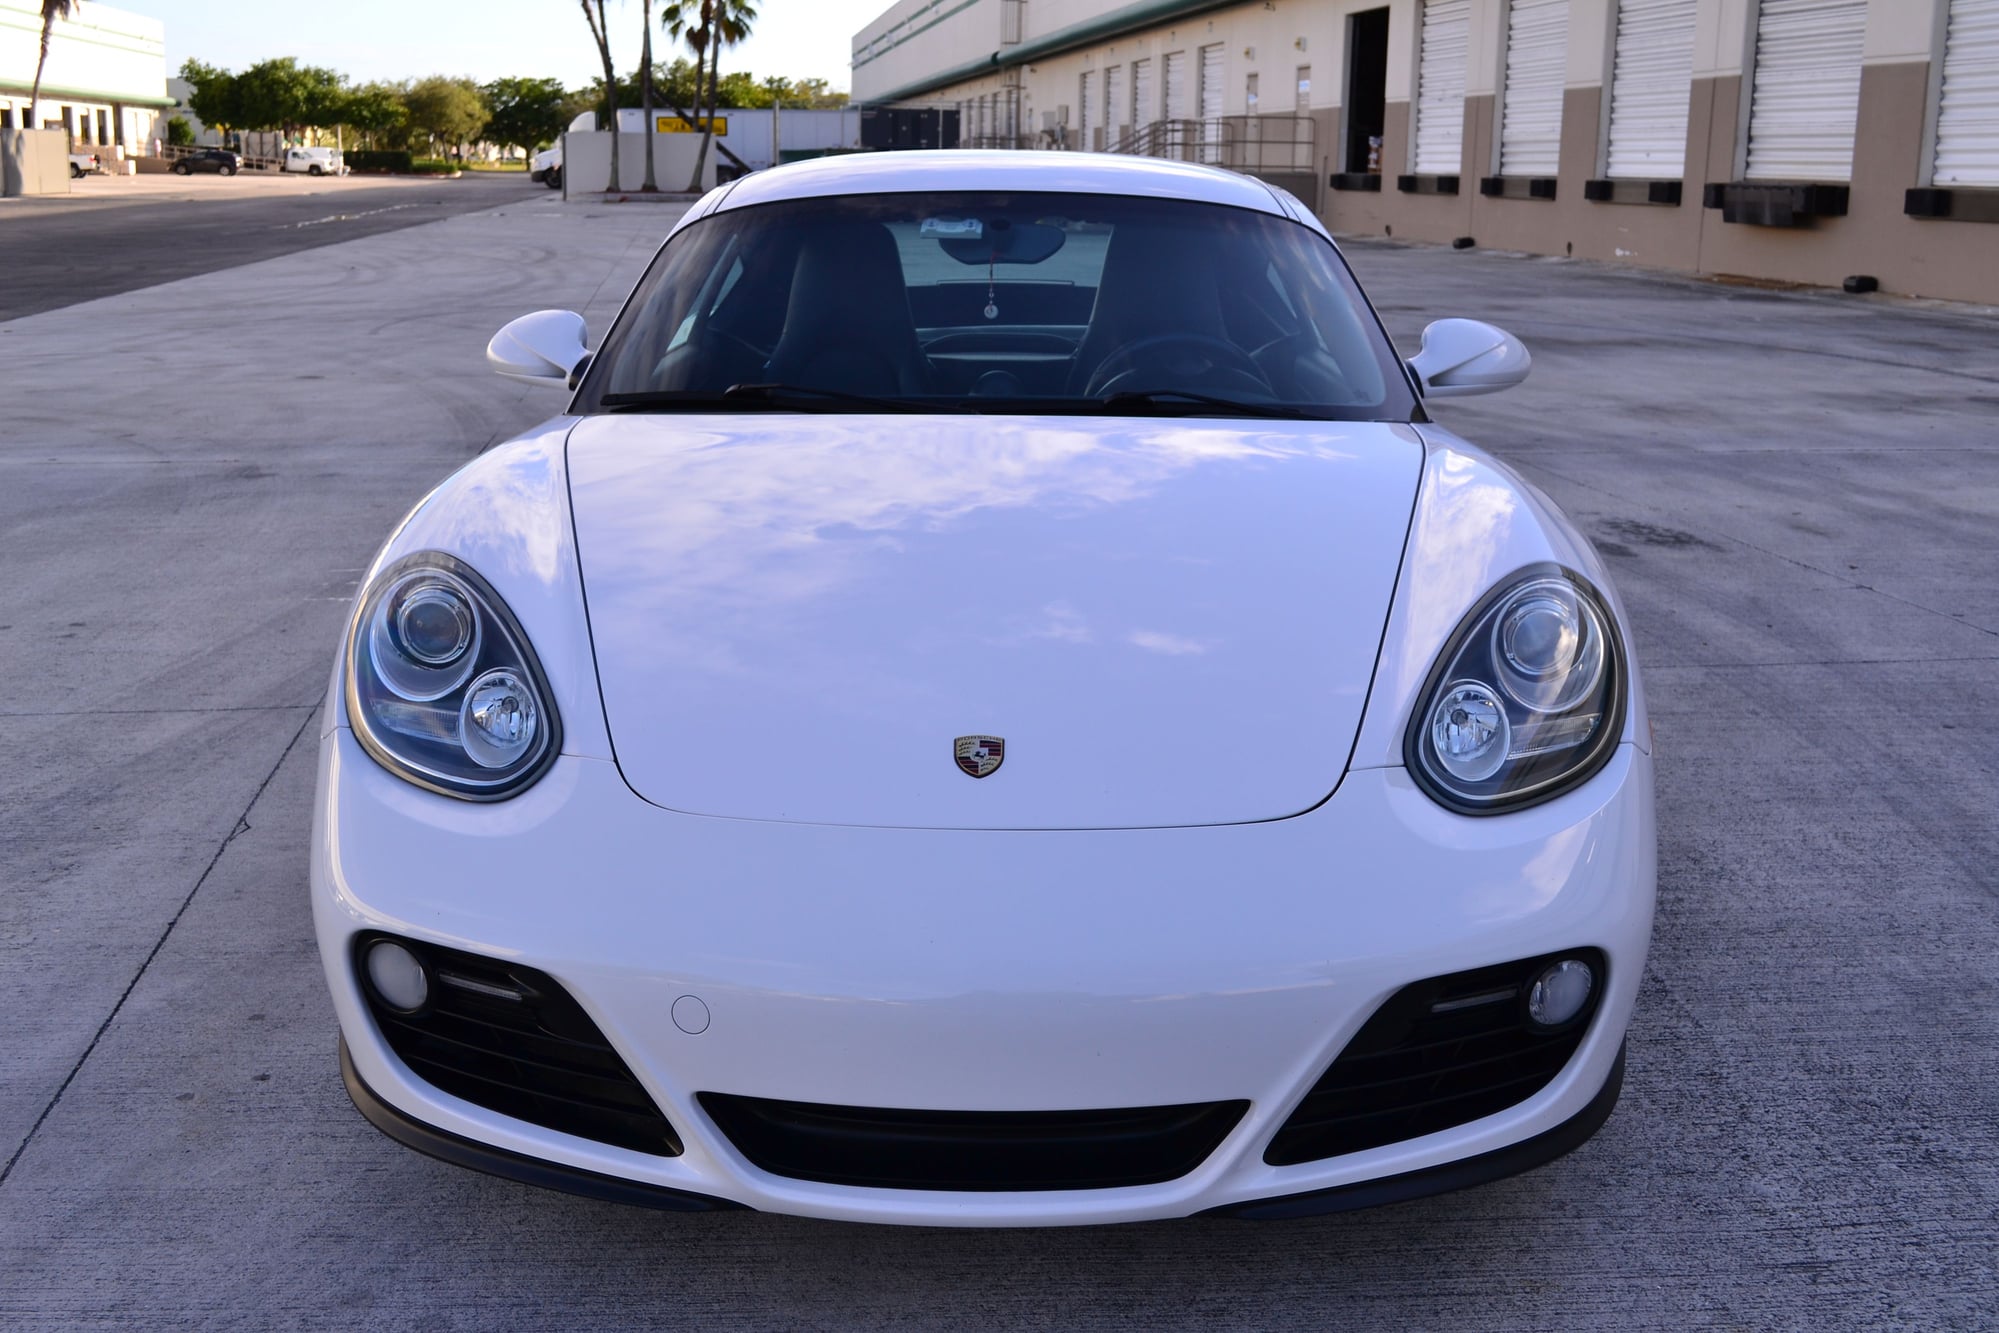 2010 Porsche Cayman - F/S 2010 Porsche Cayman PDK (Carrara white/sea blue) - Used - VIN WP0AA2A81AU760546 - 58,200 Miles - 6 cyl - 2WD - Automatic - Coupe - White - Lighthouse Point, FL 33064, United States